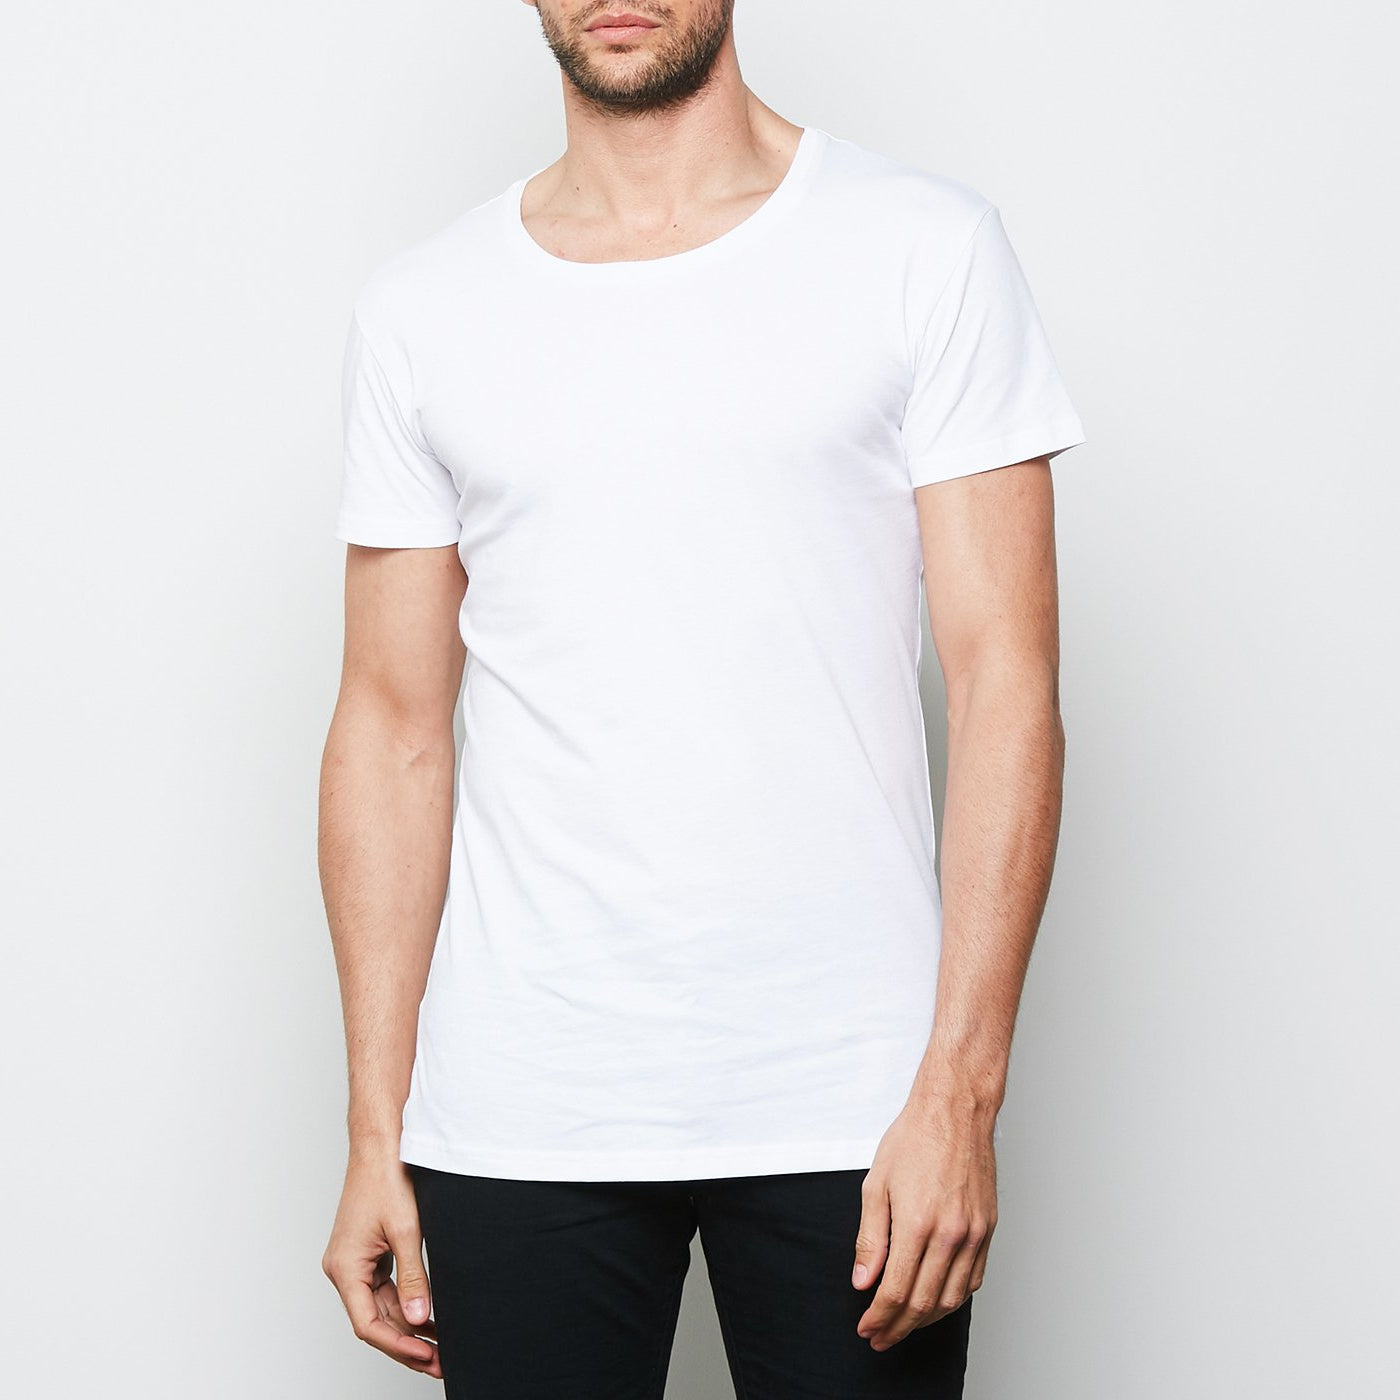 Vented Tee, Style #1104